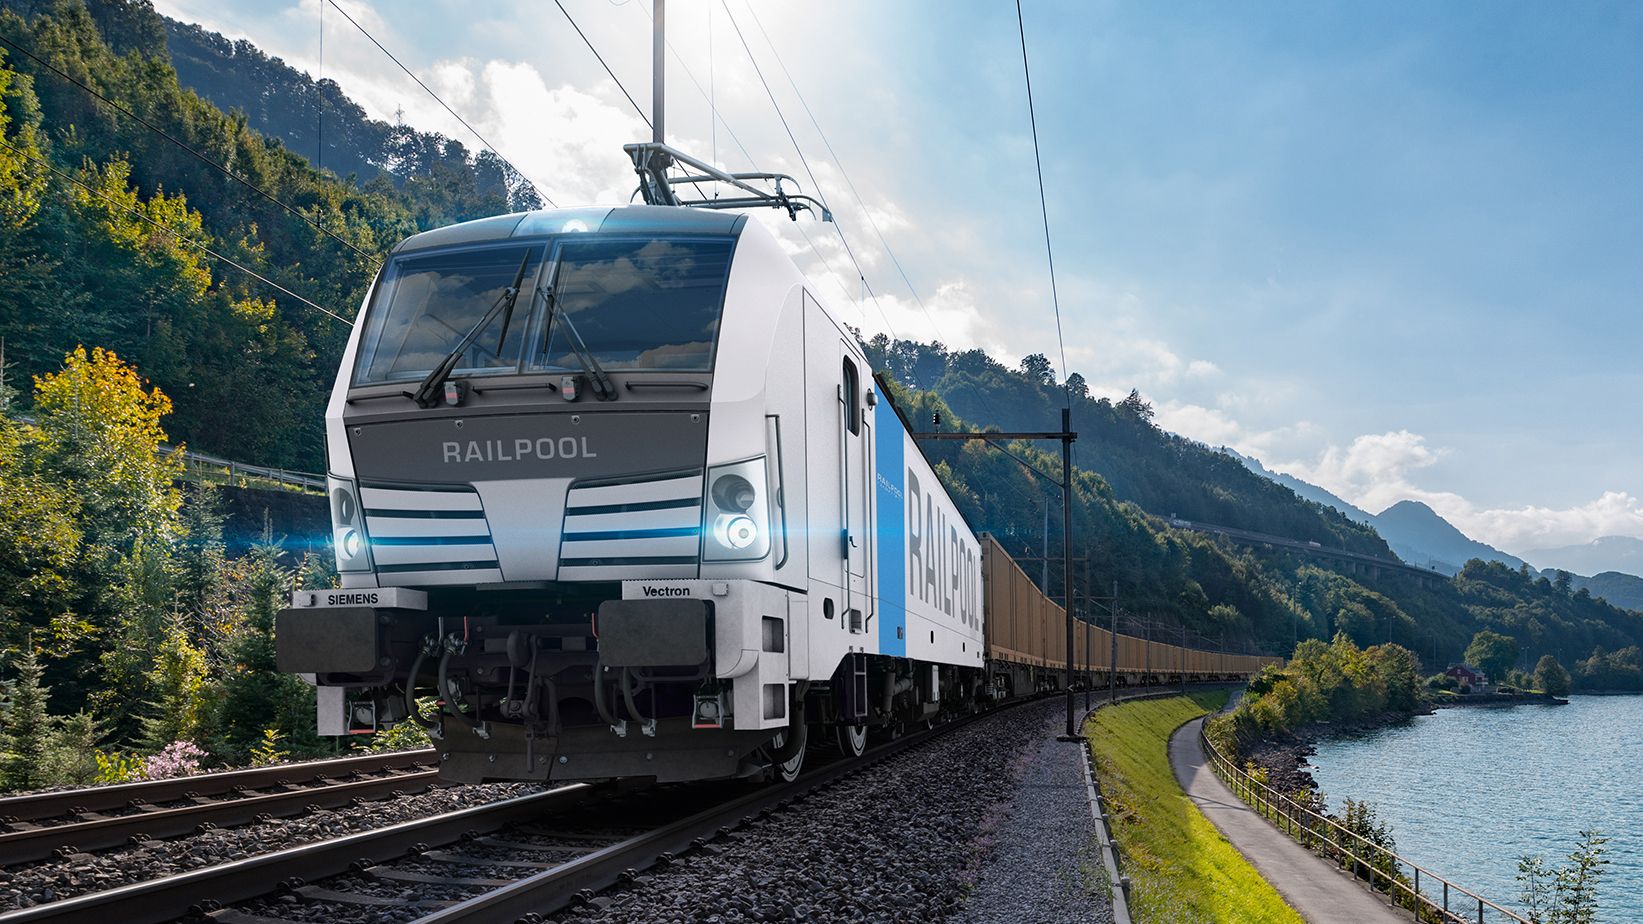 The Vectron locomotives will be deployed on cross-border routes in Europe